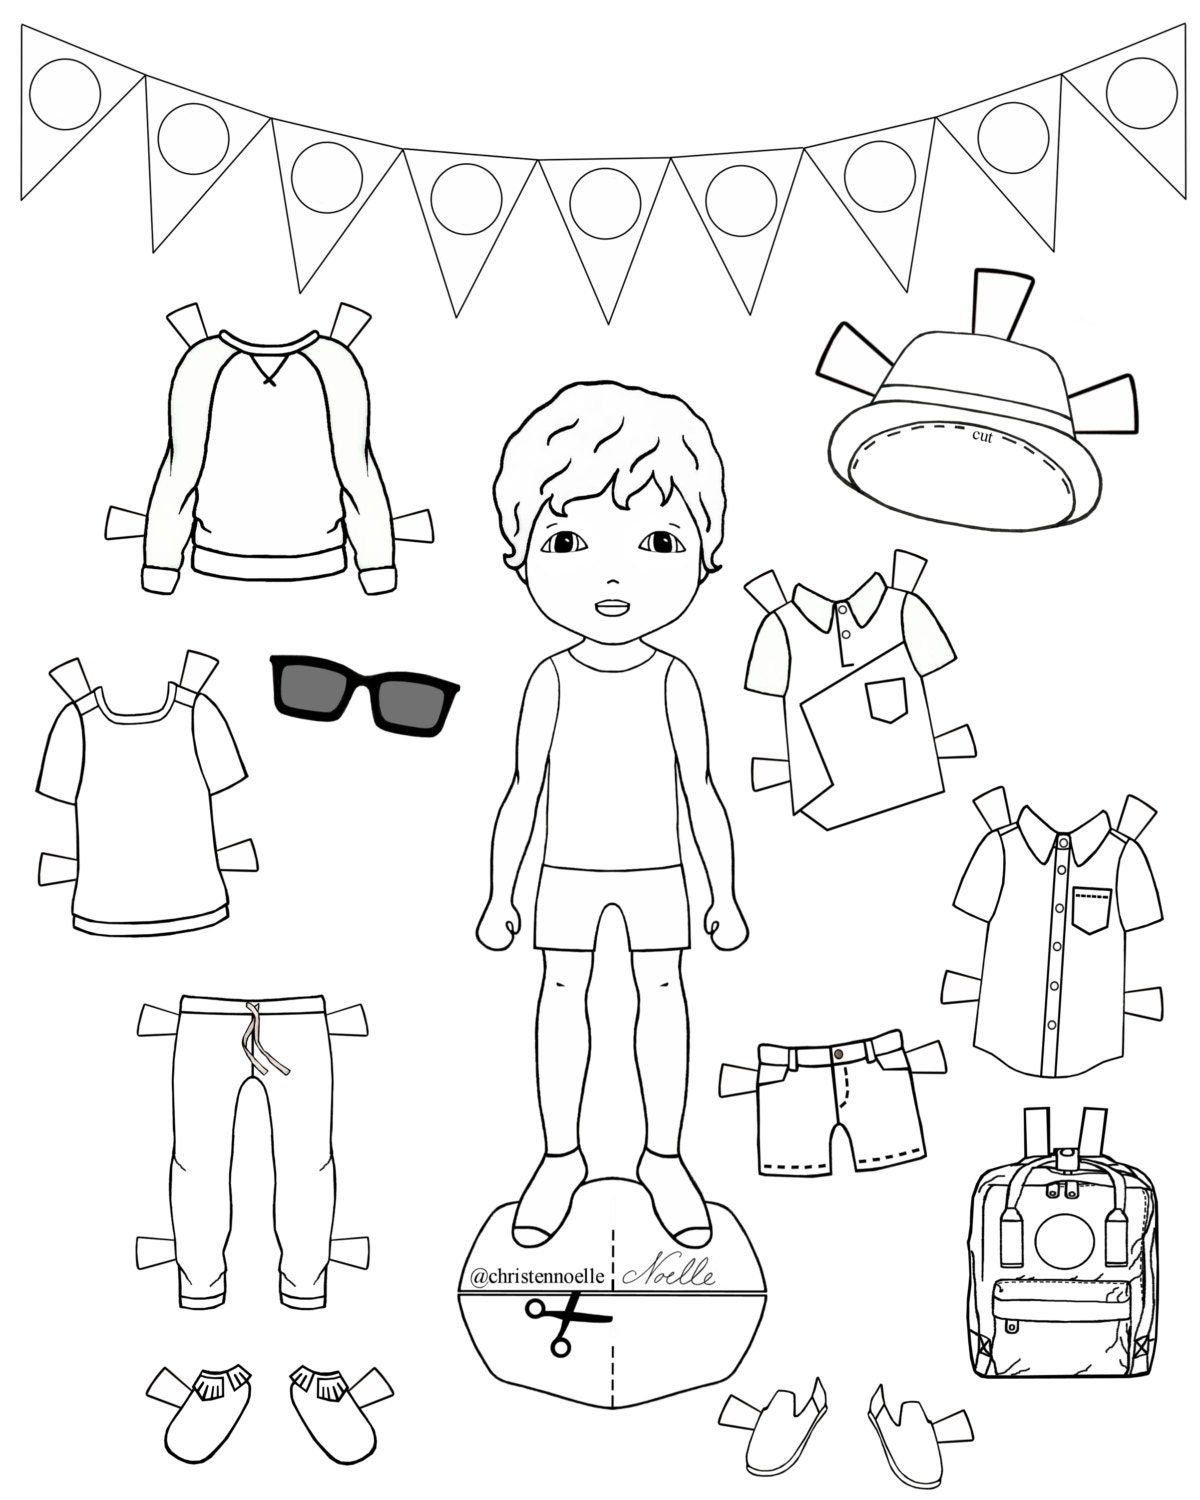 Color Me Printable Black And White Paper Dolls Hand Drawn Clothing Accessories Kids Fashion Party Favors Etsy Canada Paper Dolls Paper Dolls Printable Paper Doll Printable Templates